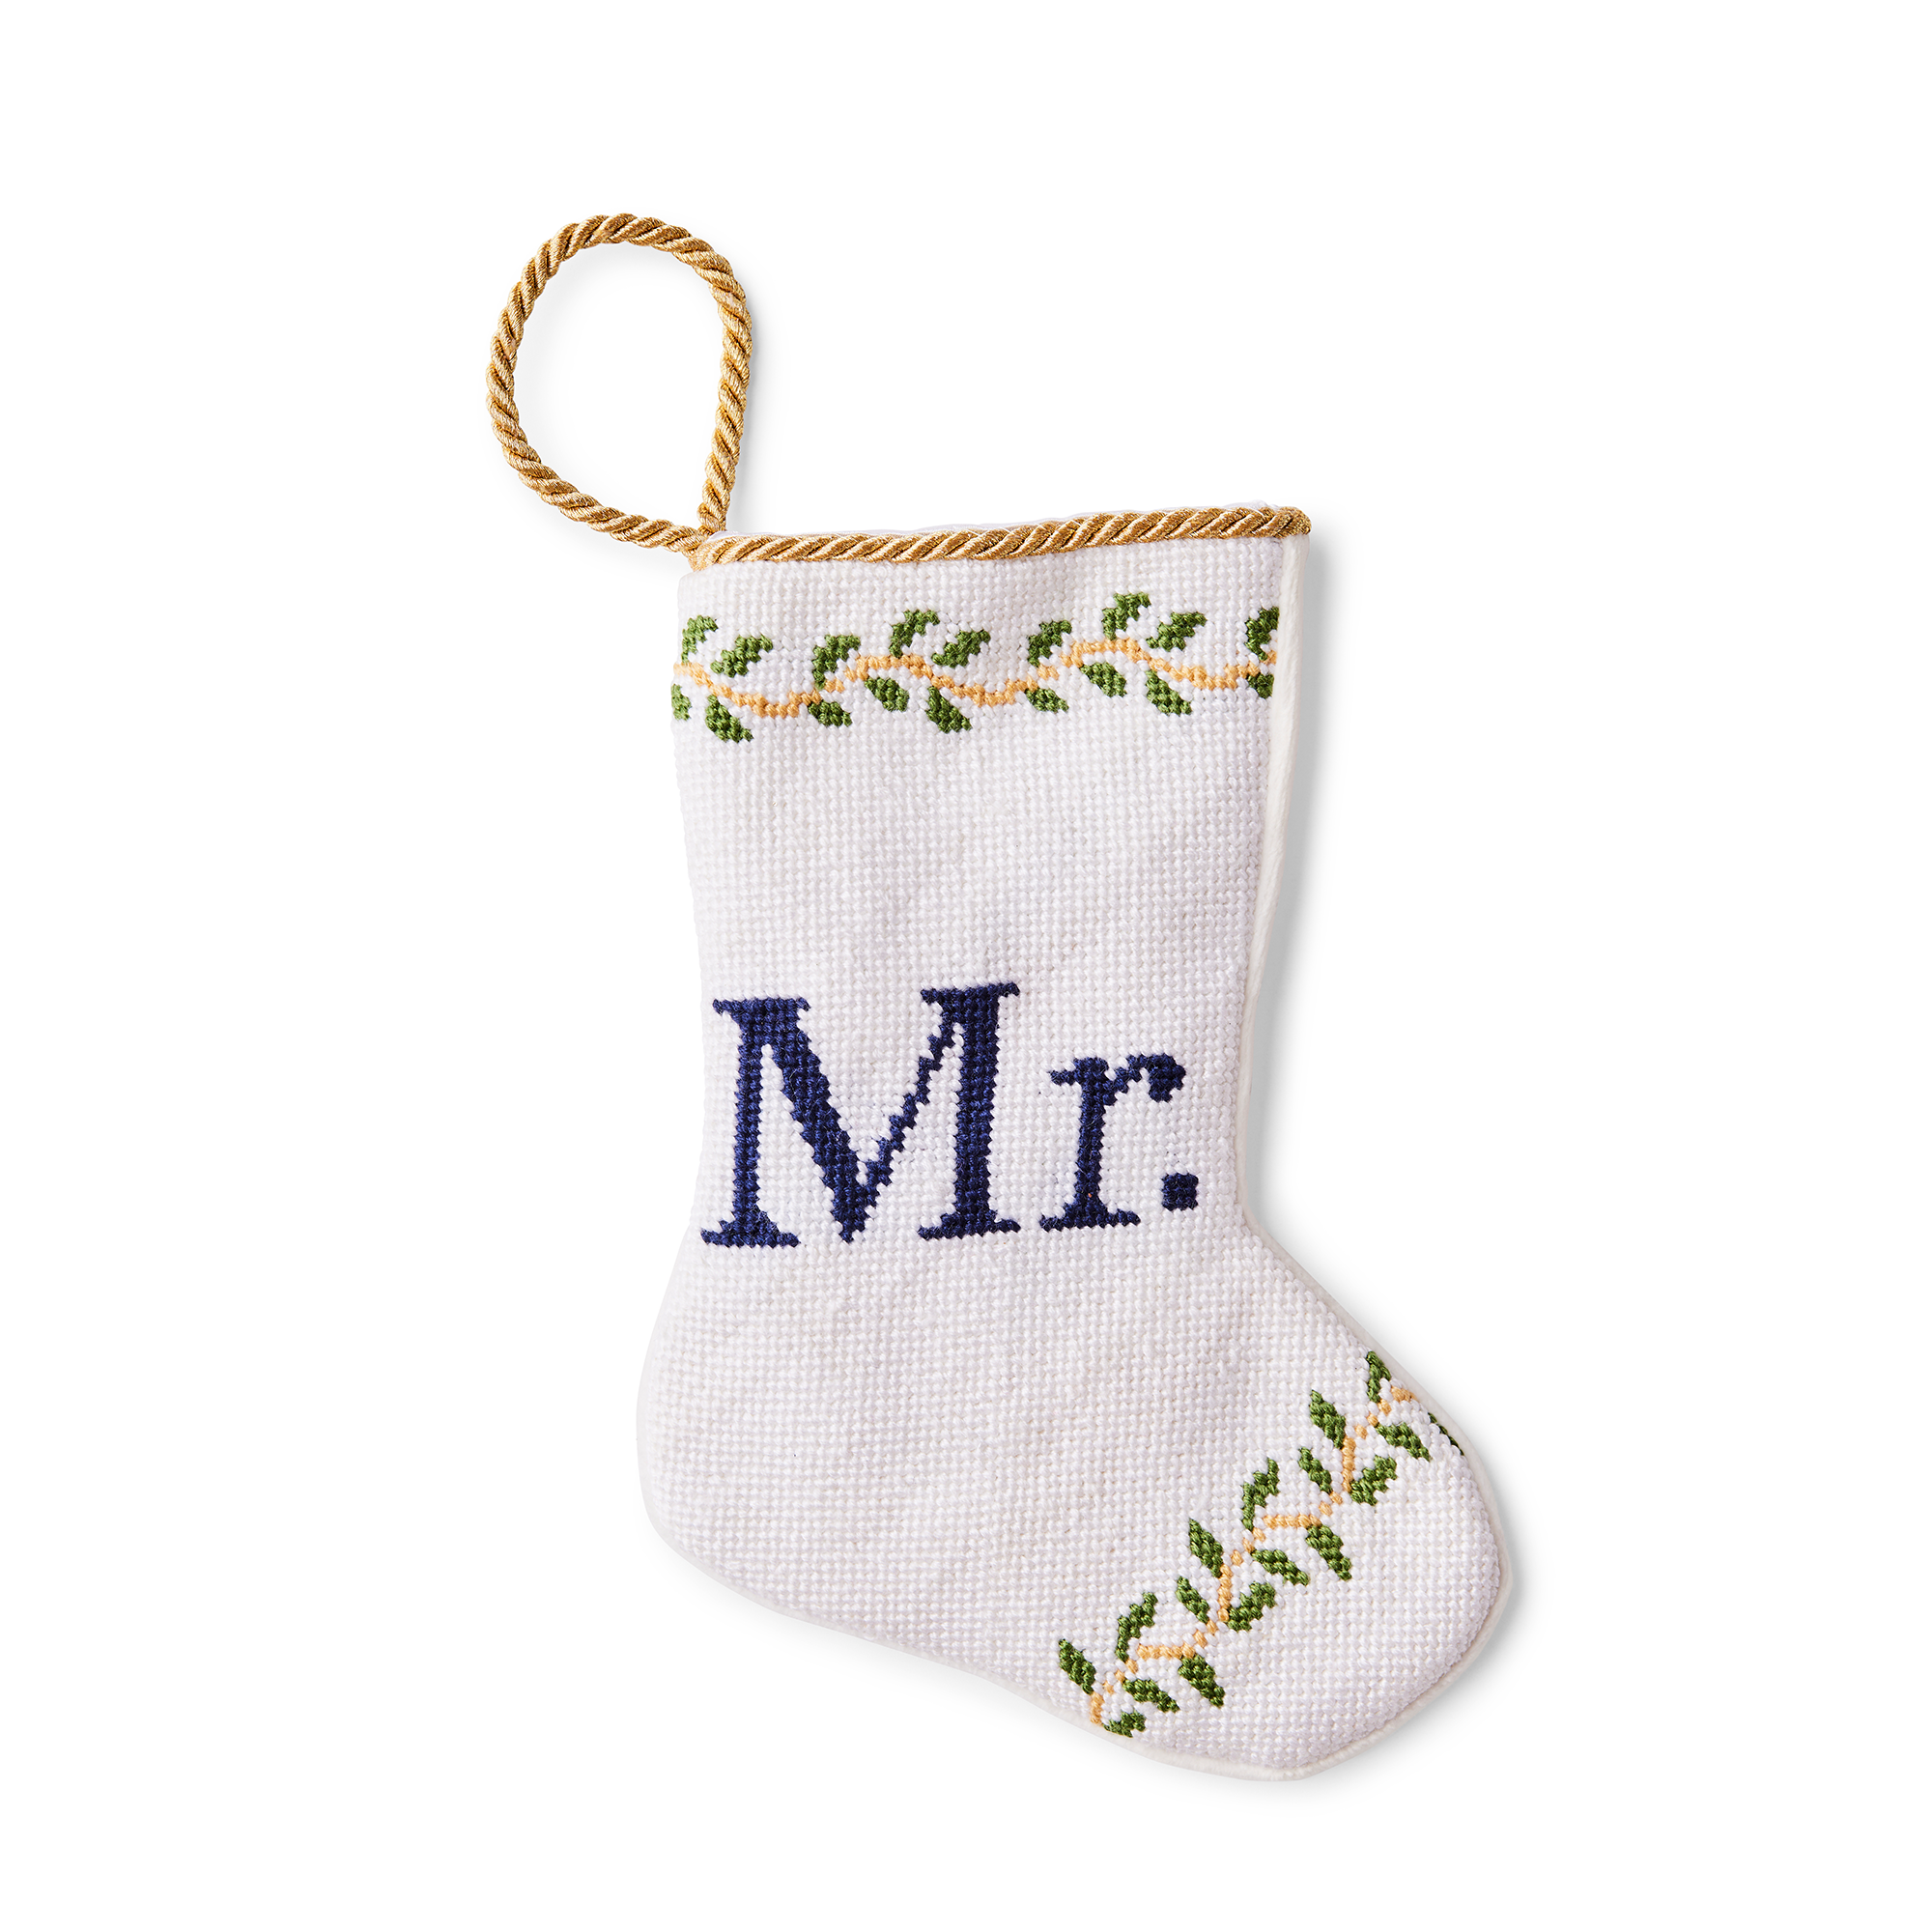 A small, intricately designed needlepoint stocking featuring the word 'Mr.' in elegant script. The illustration is set against a delicate, wedding-themed background. Perfect for a place setting, a unique gift, or a clue to it, concert tickets, jewelry or anything else small and thoughtful.